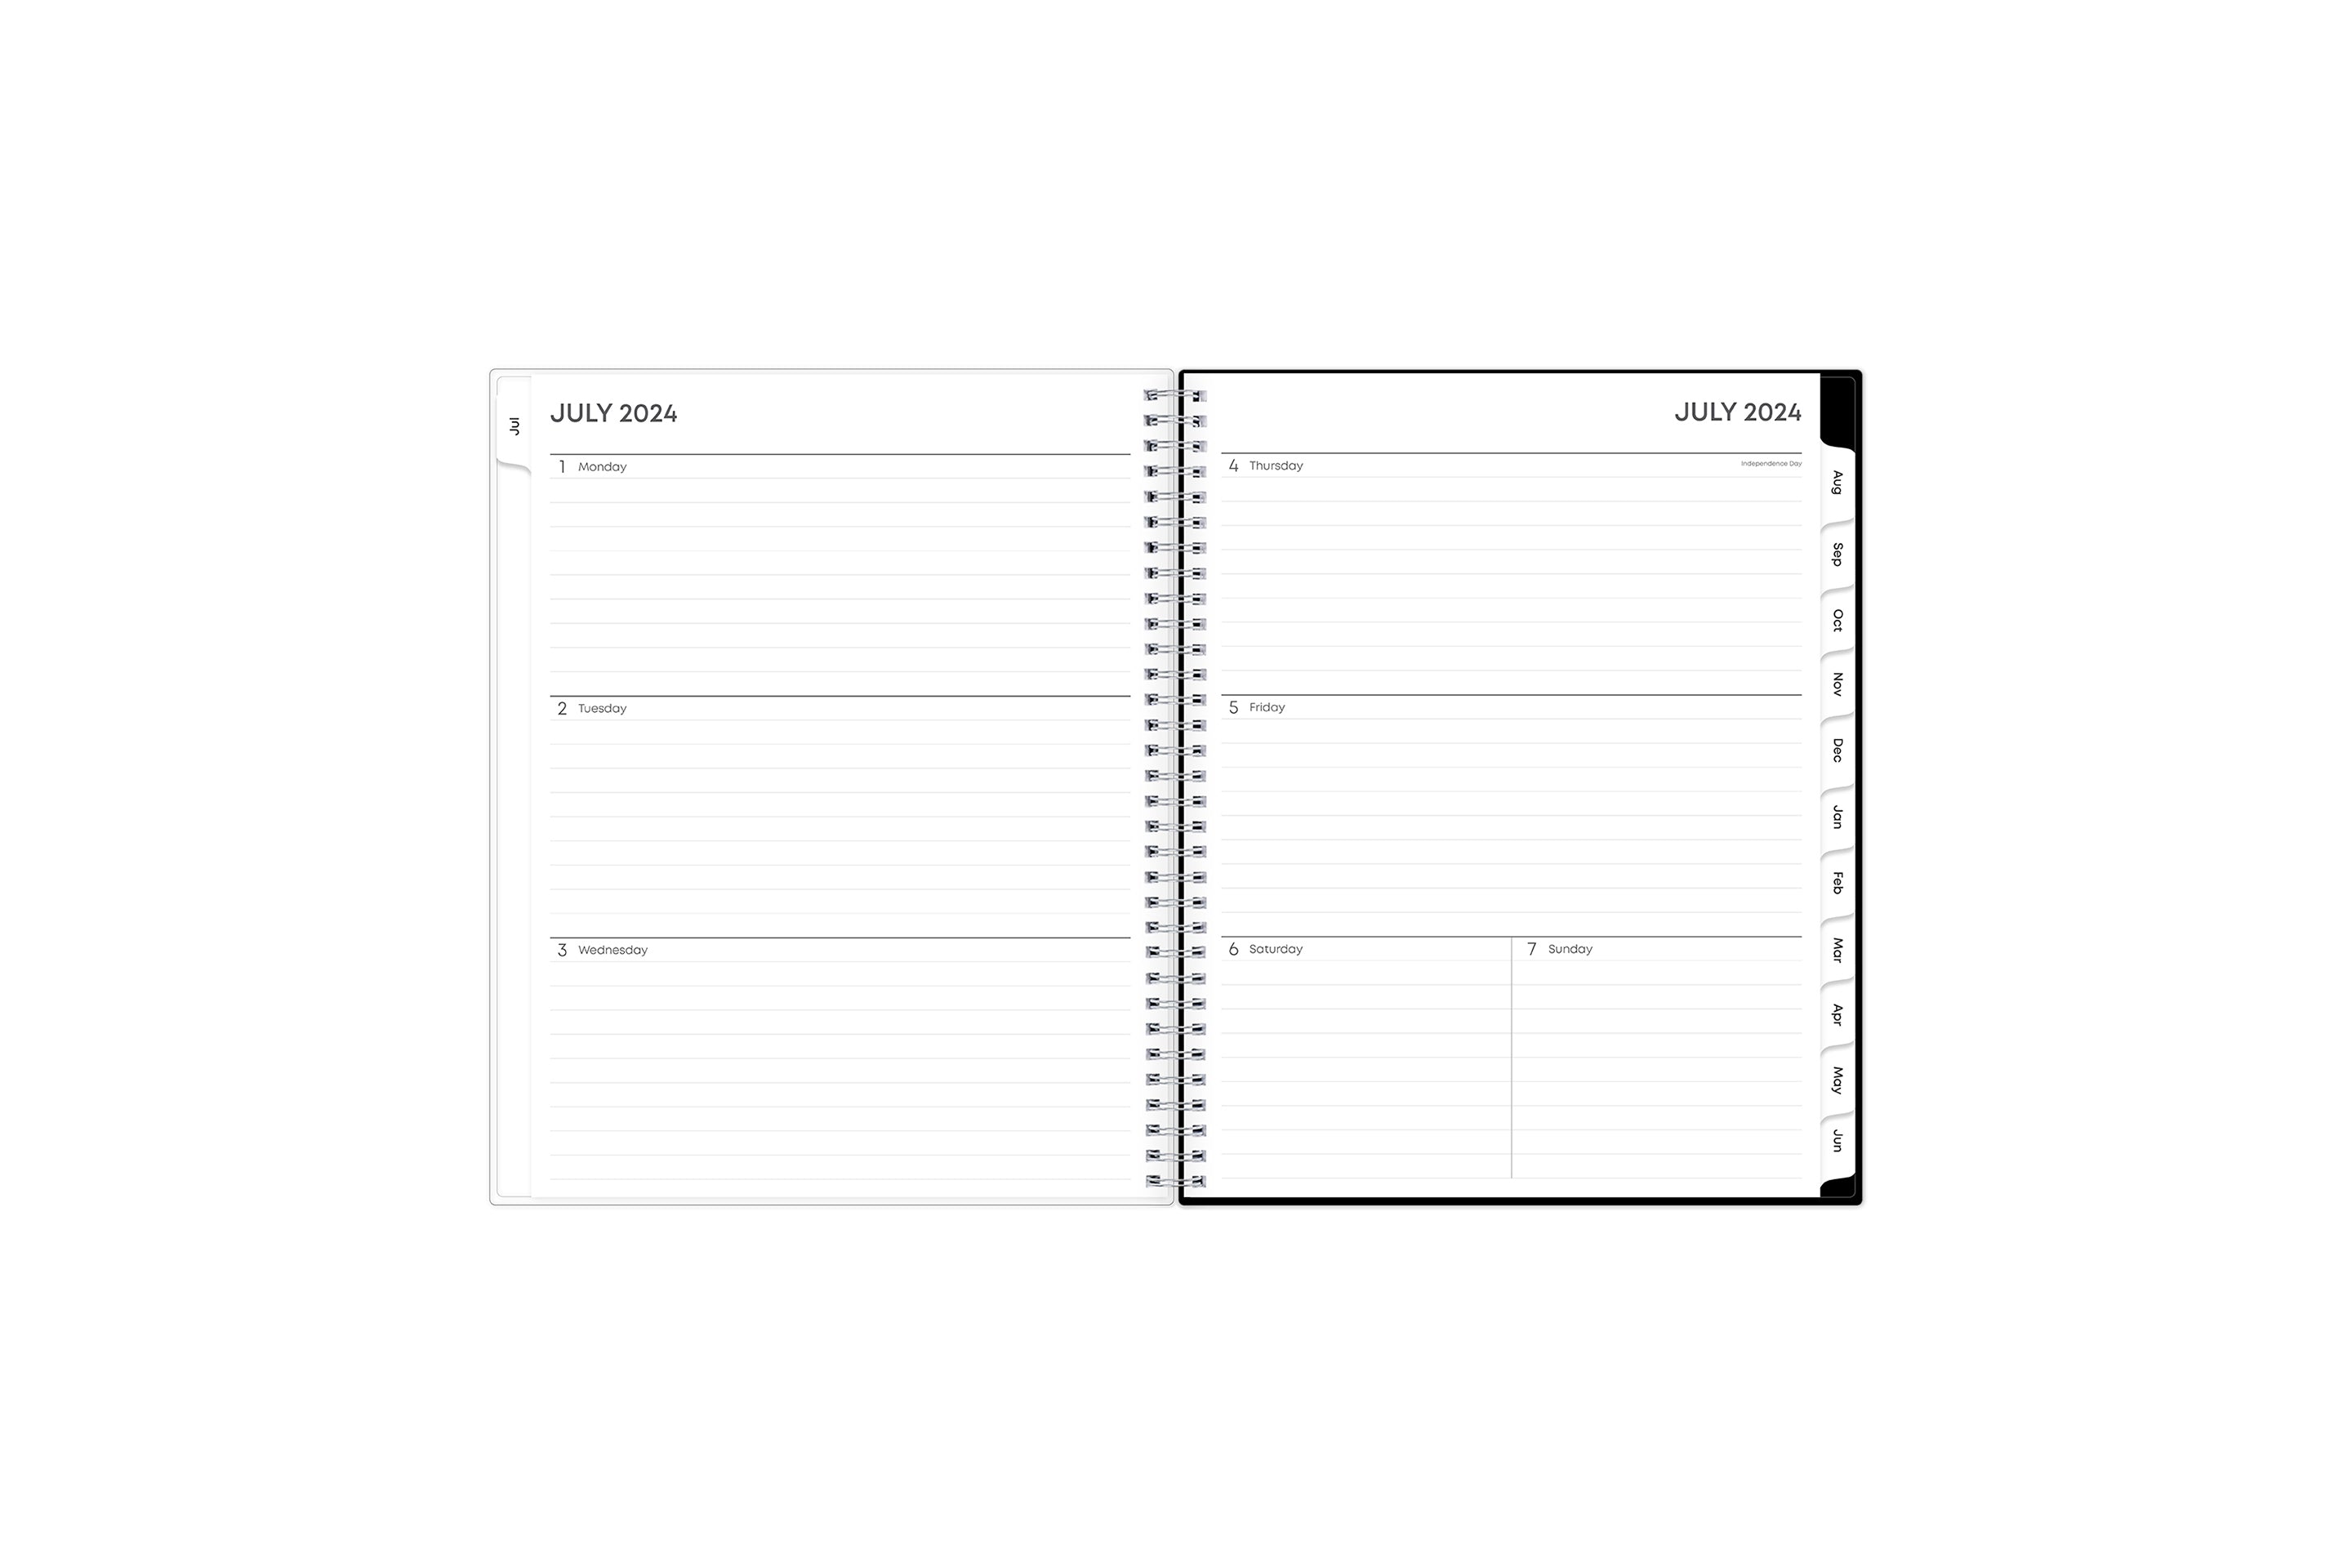 weekly and monthly academic planner featuring a weekly spread with ample lined writing space for notes, to-do list, weekly goals in a 8.5x11 planner